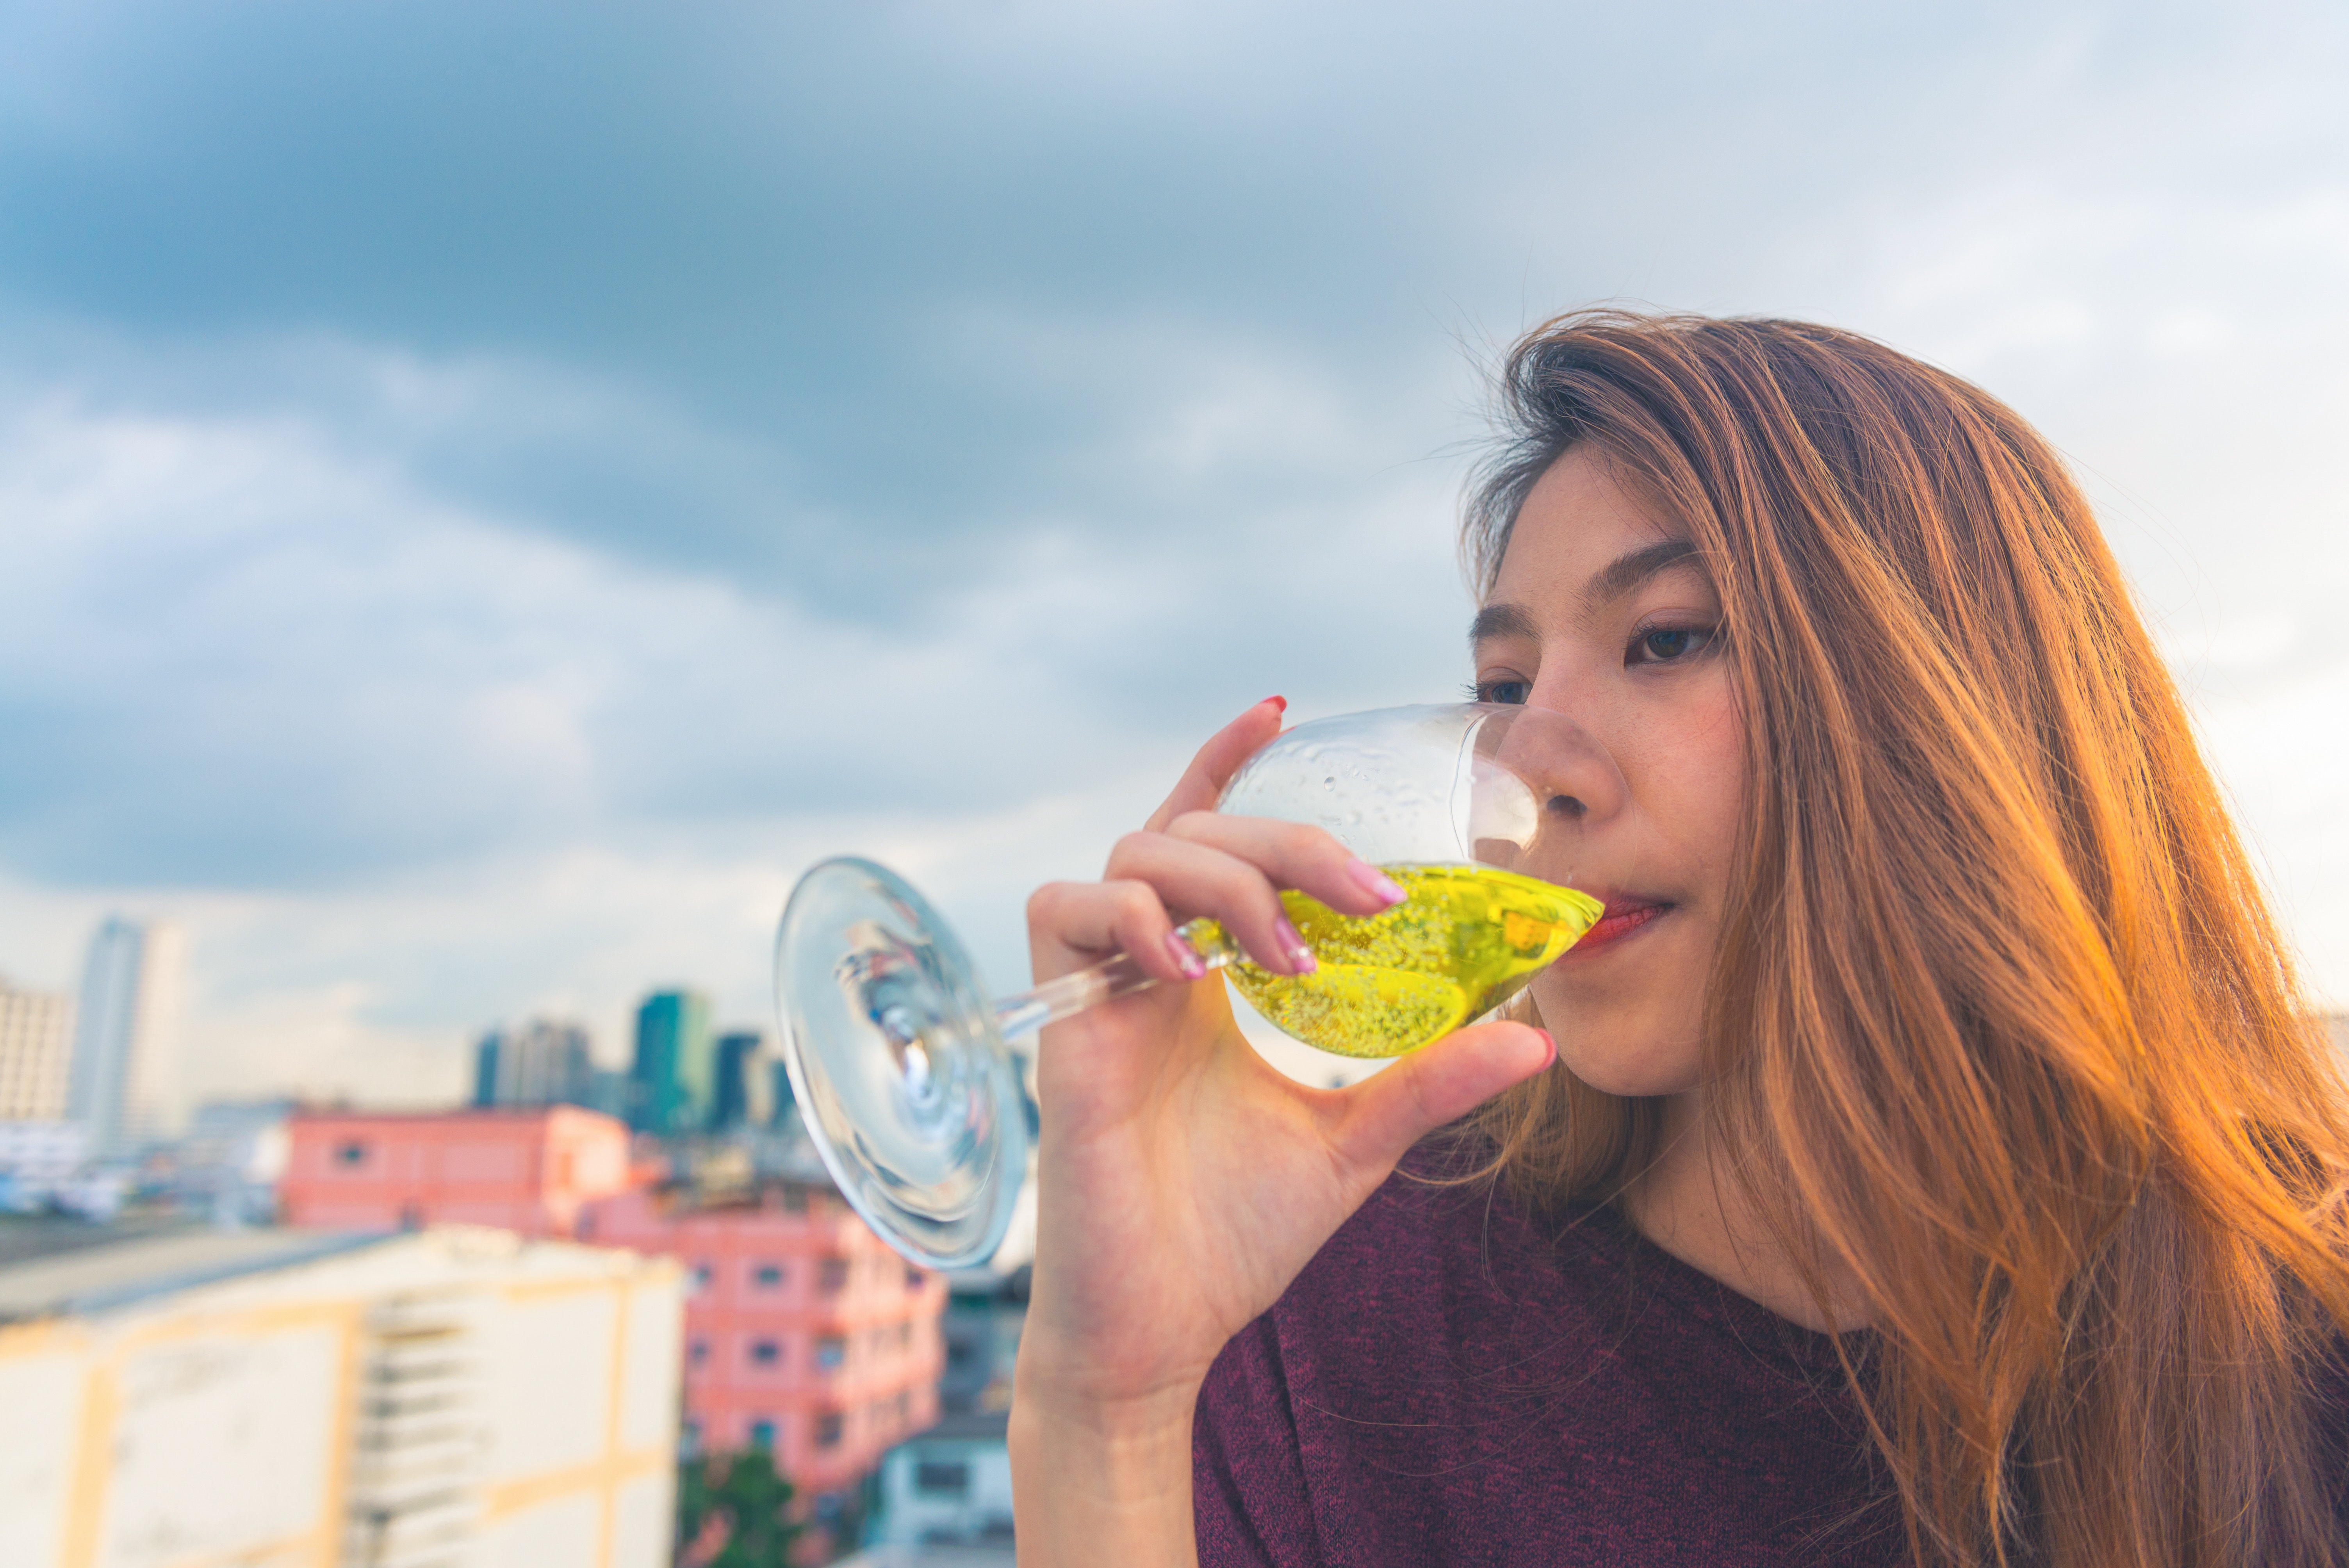 Free photo: Woman in Purple Top Drinking on Clear Wine Glass - Adult ...